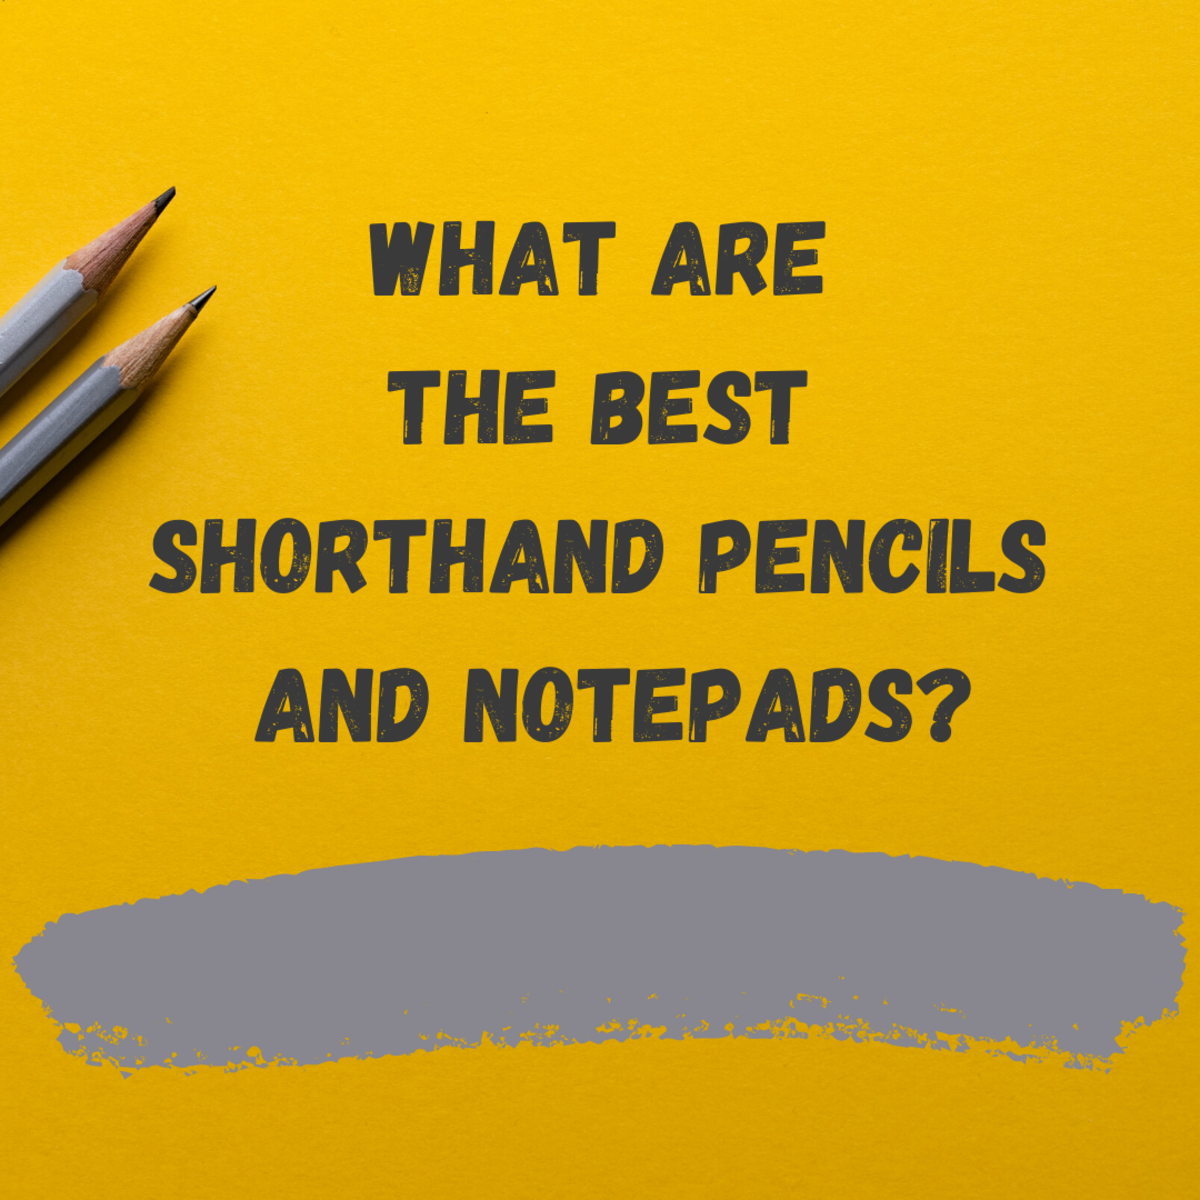 What Are the Best Shorthand Pencils and Notepads?